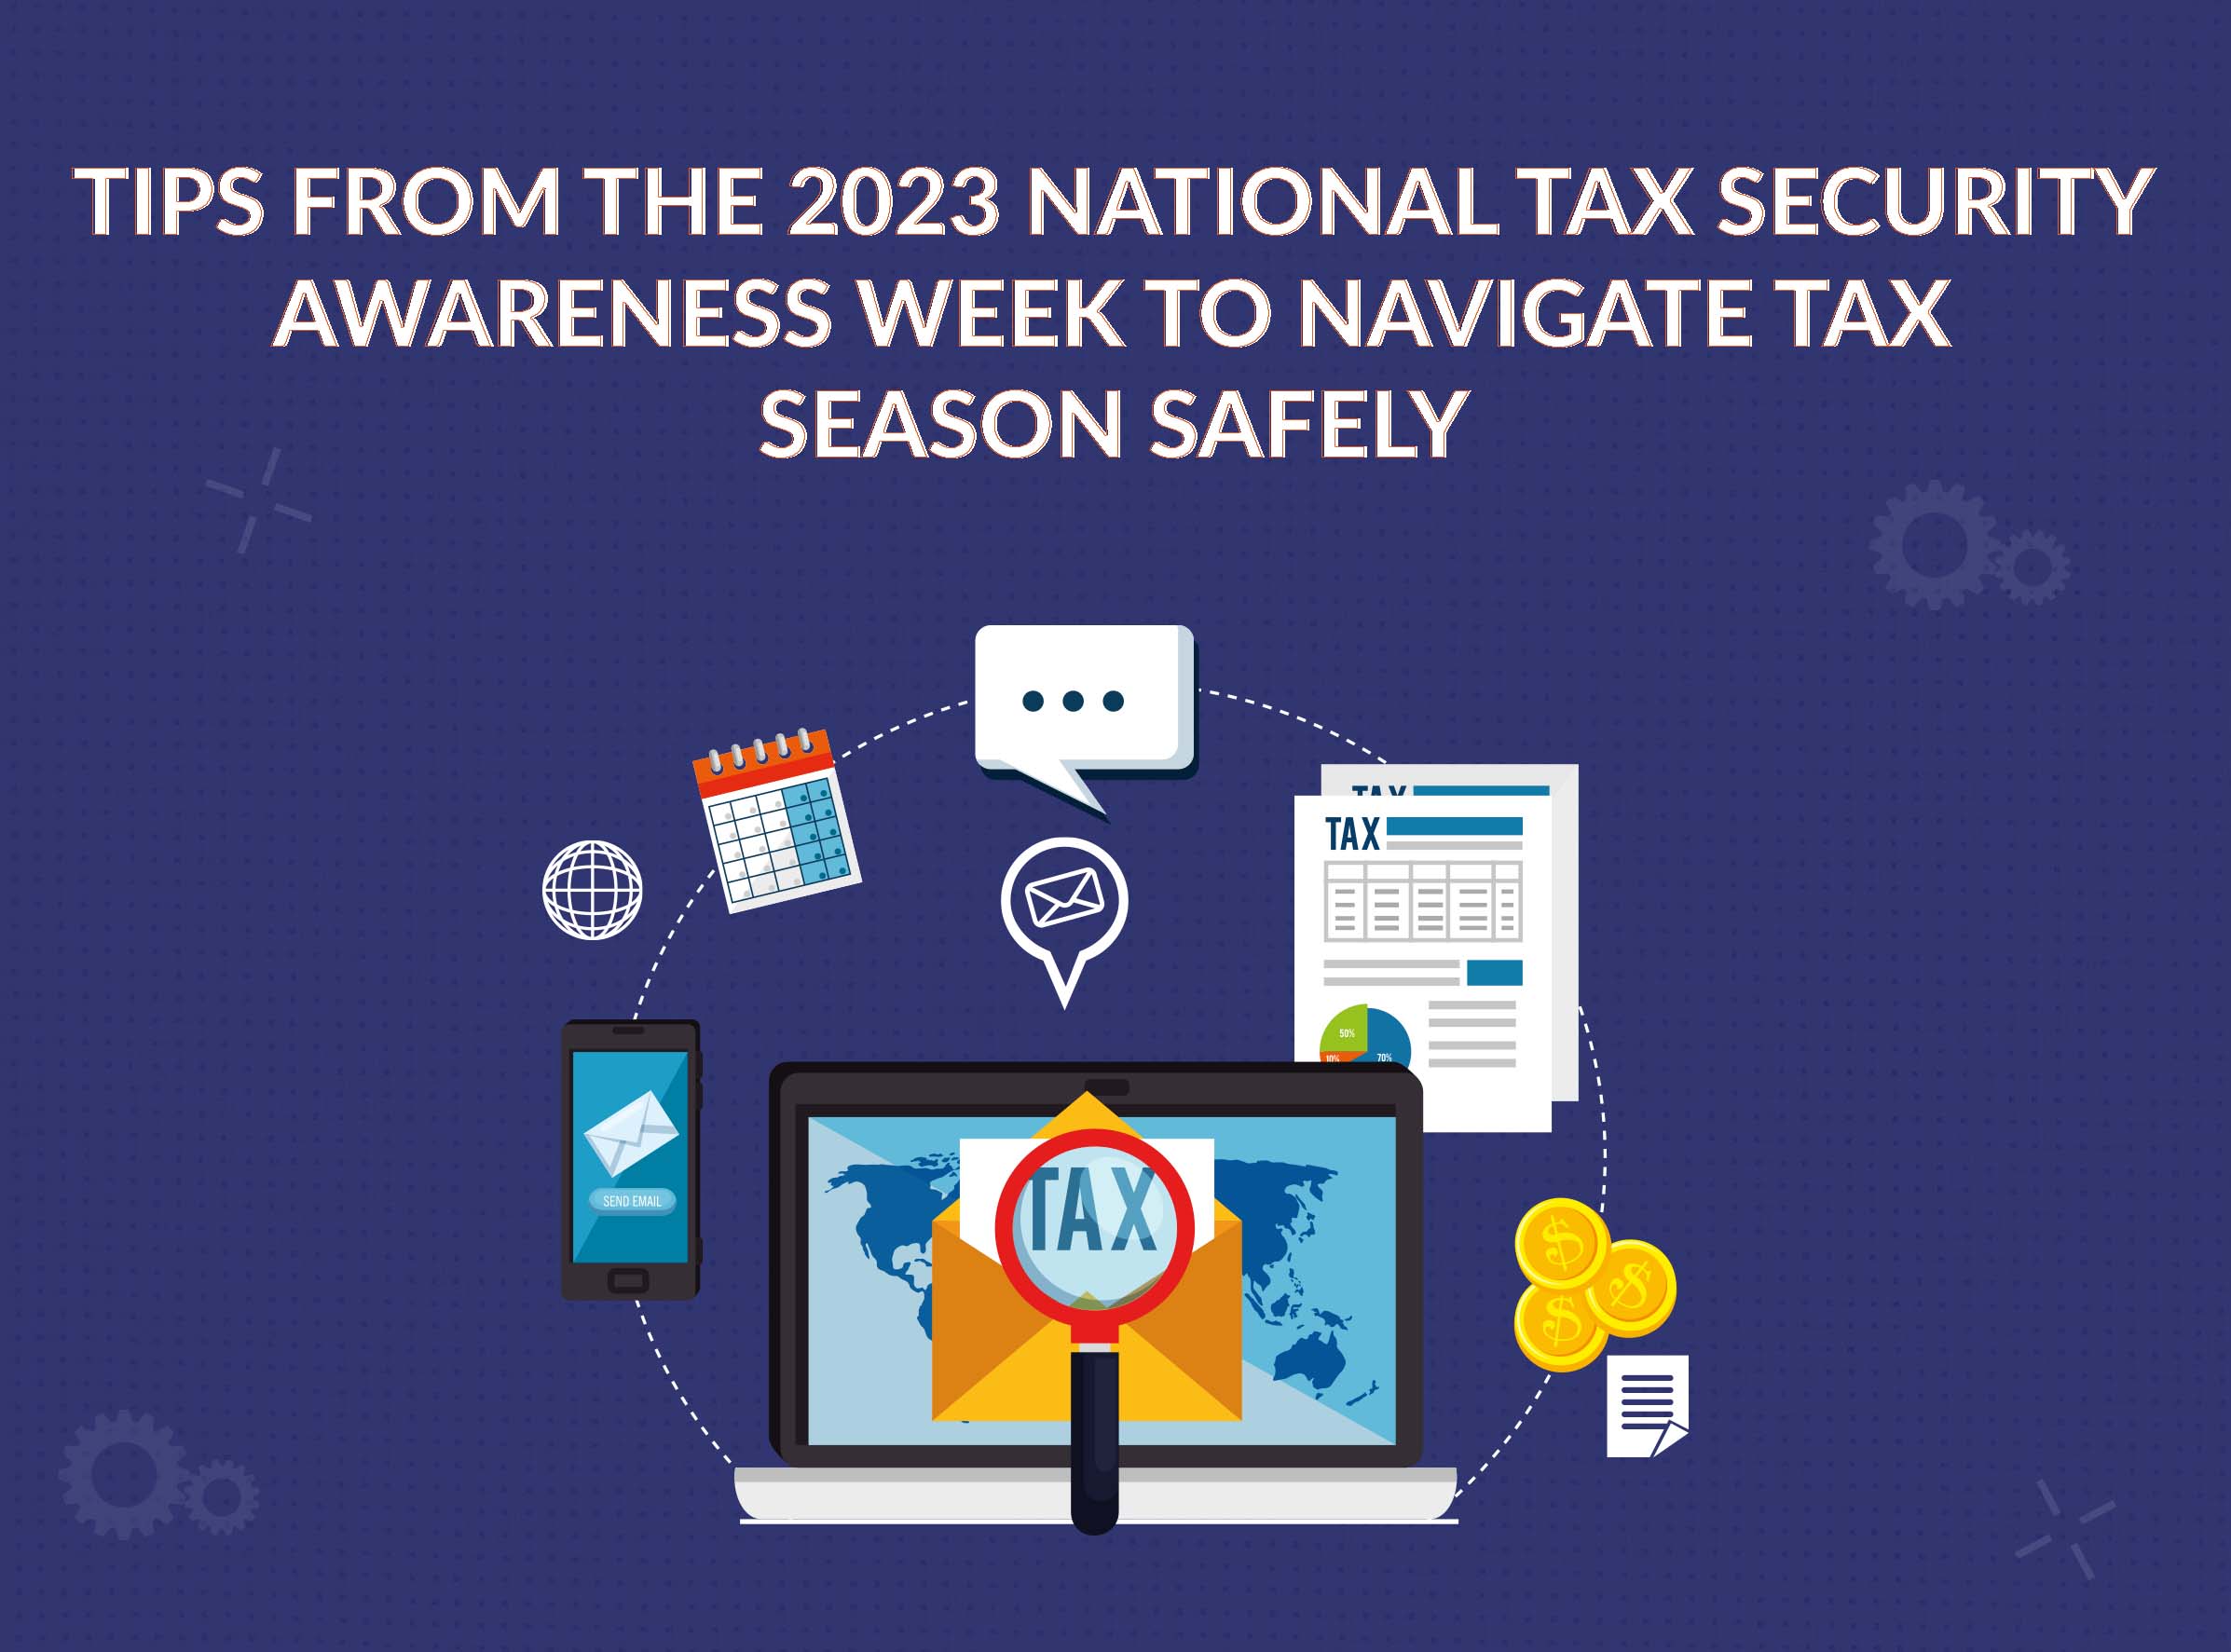 Tips from the 2023 National Tax Security Awareness Week to Navigate Tax Season Safely